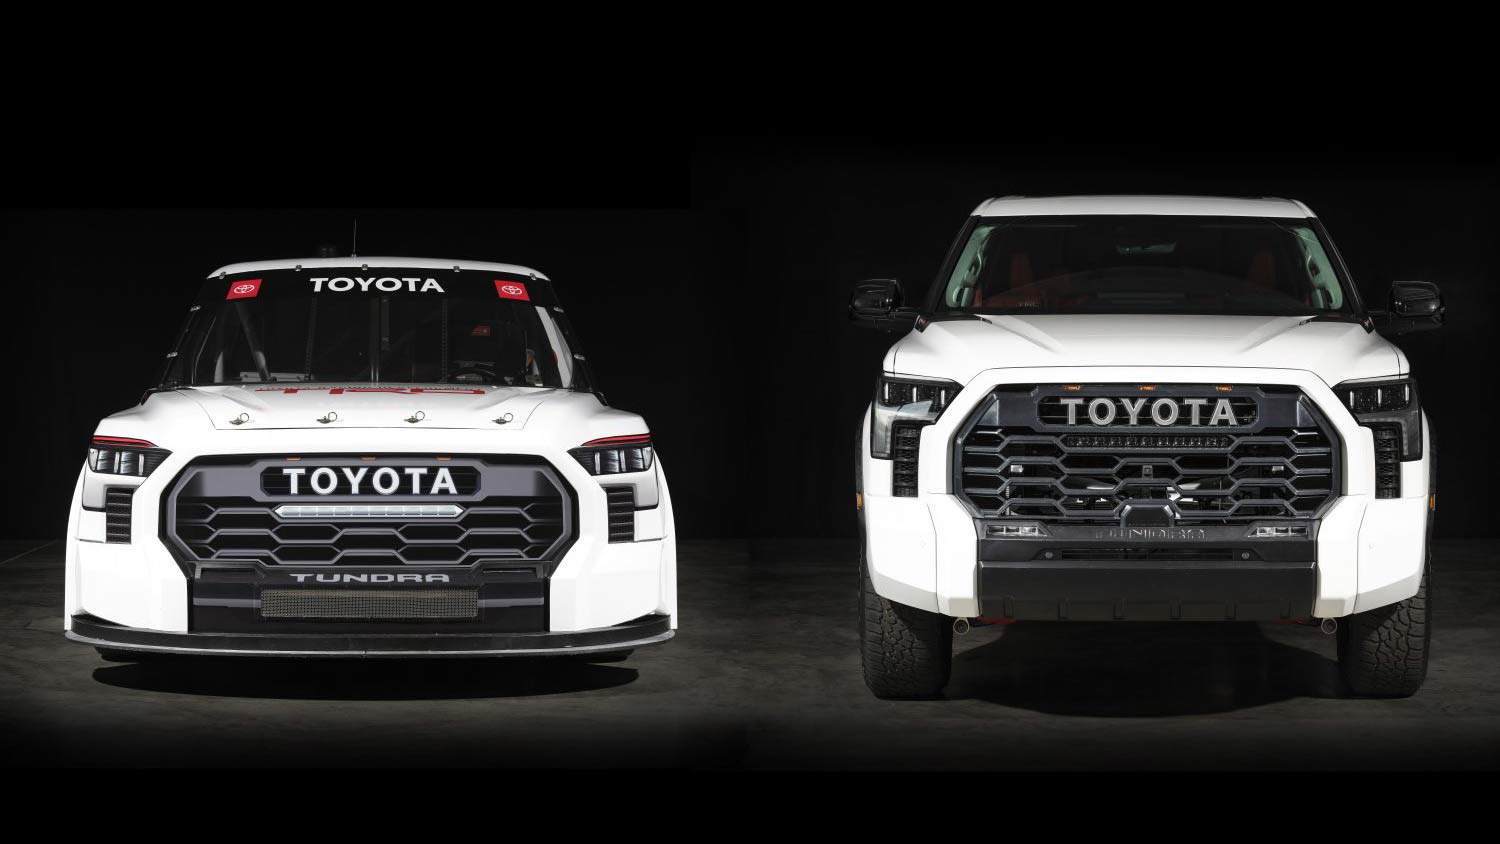 This Toyota Tundra will join the 2022 NASCAR Camping World Truck Series